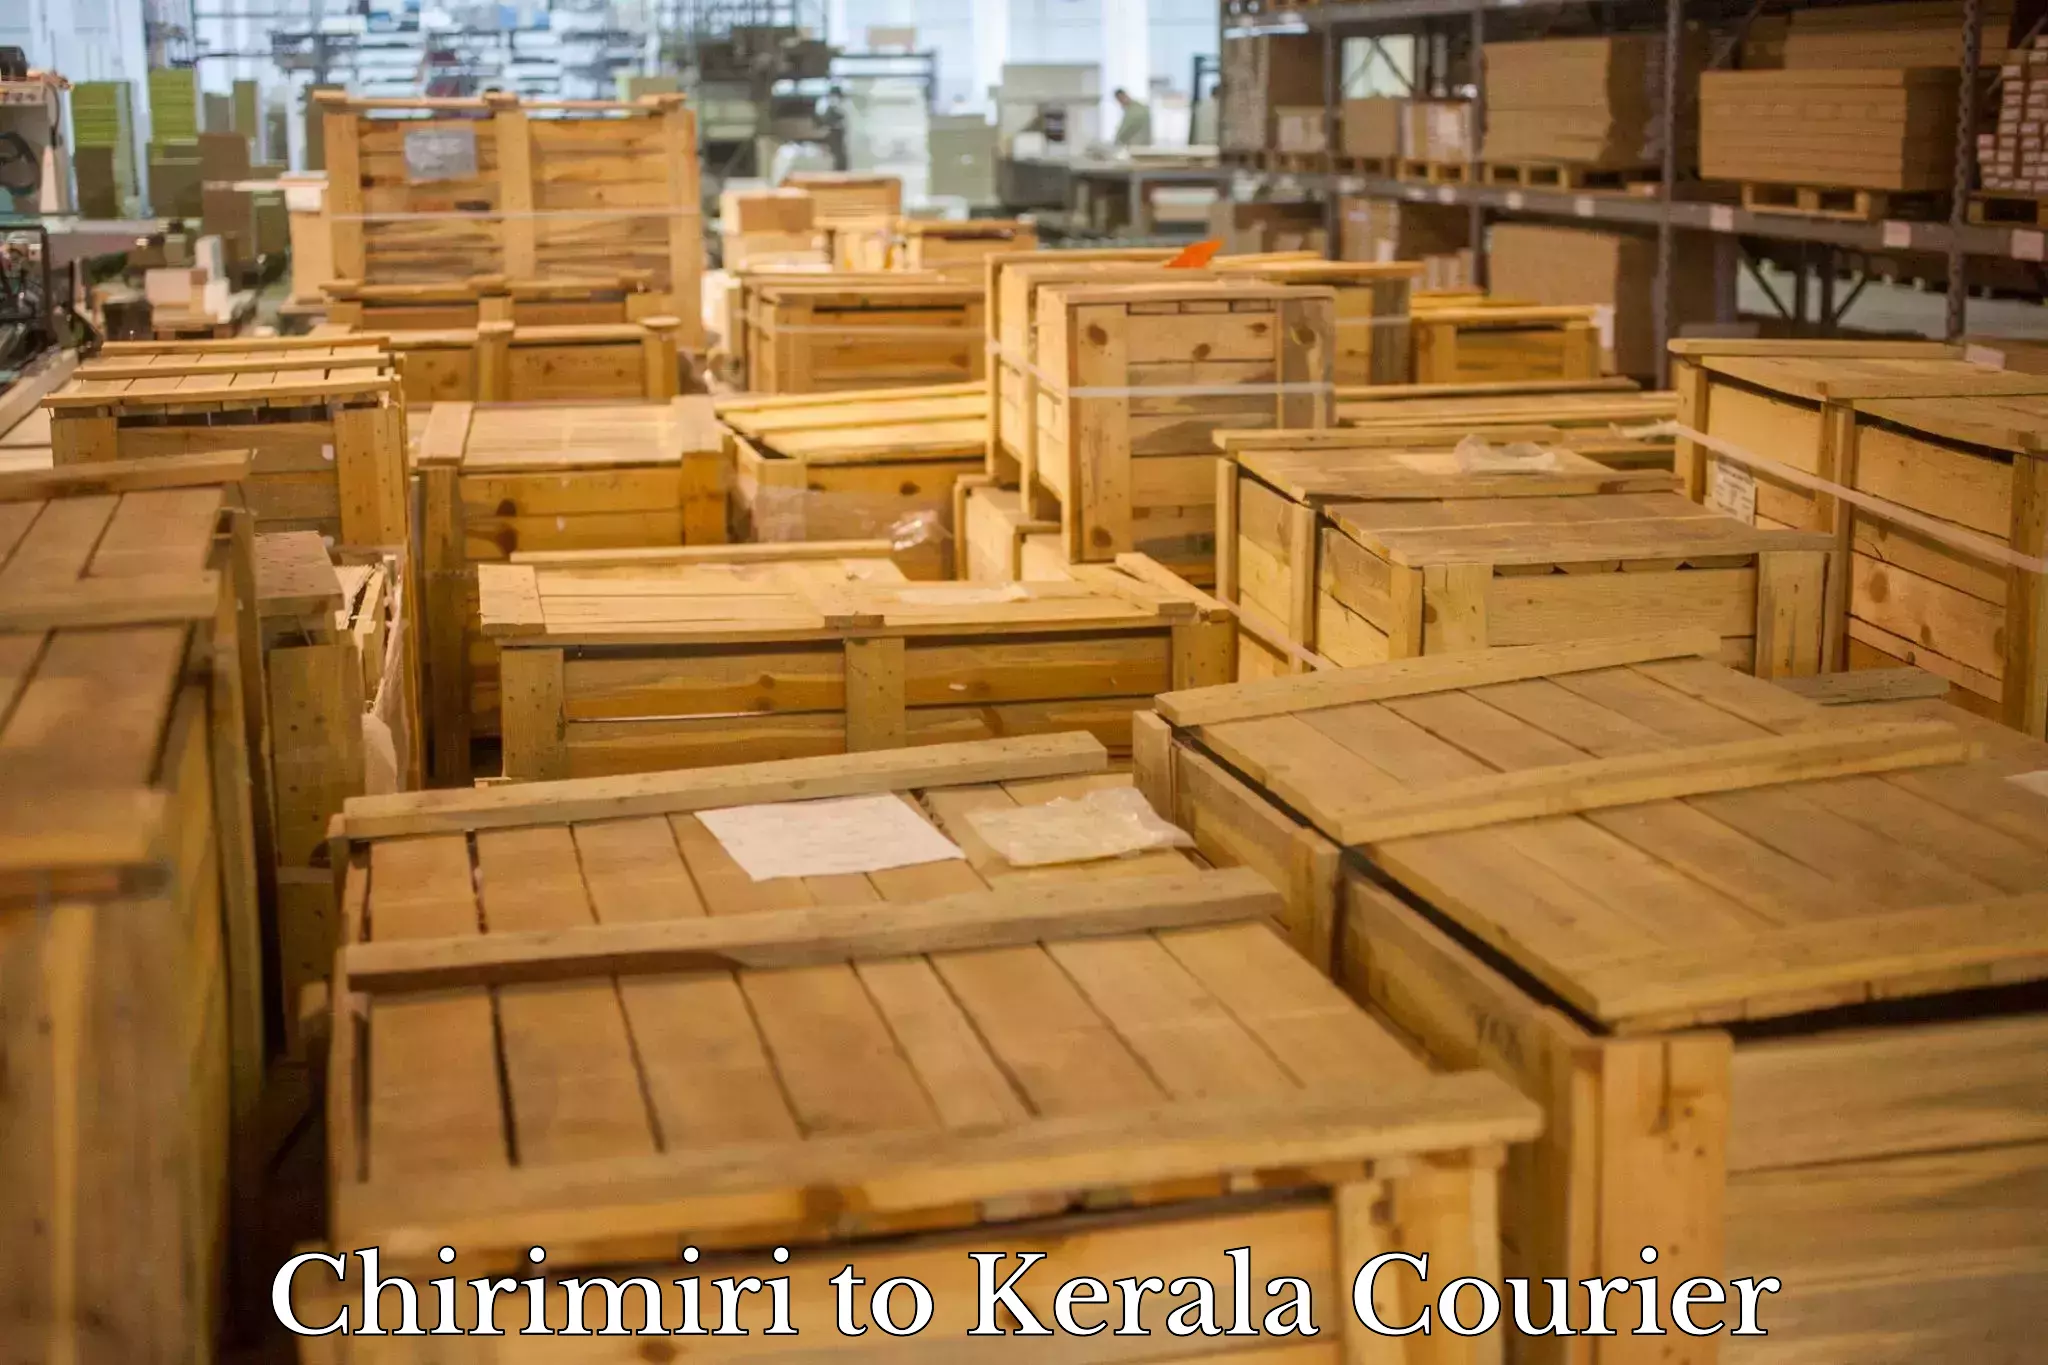 Multi-national courier services Chirimiri to Kerala